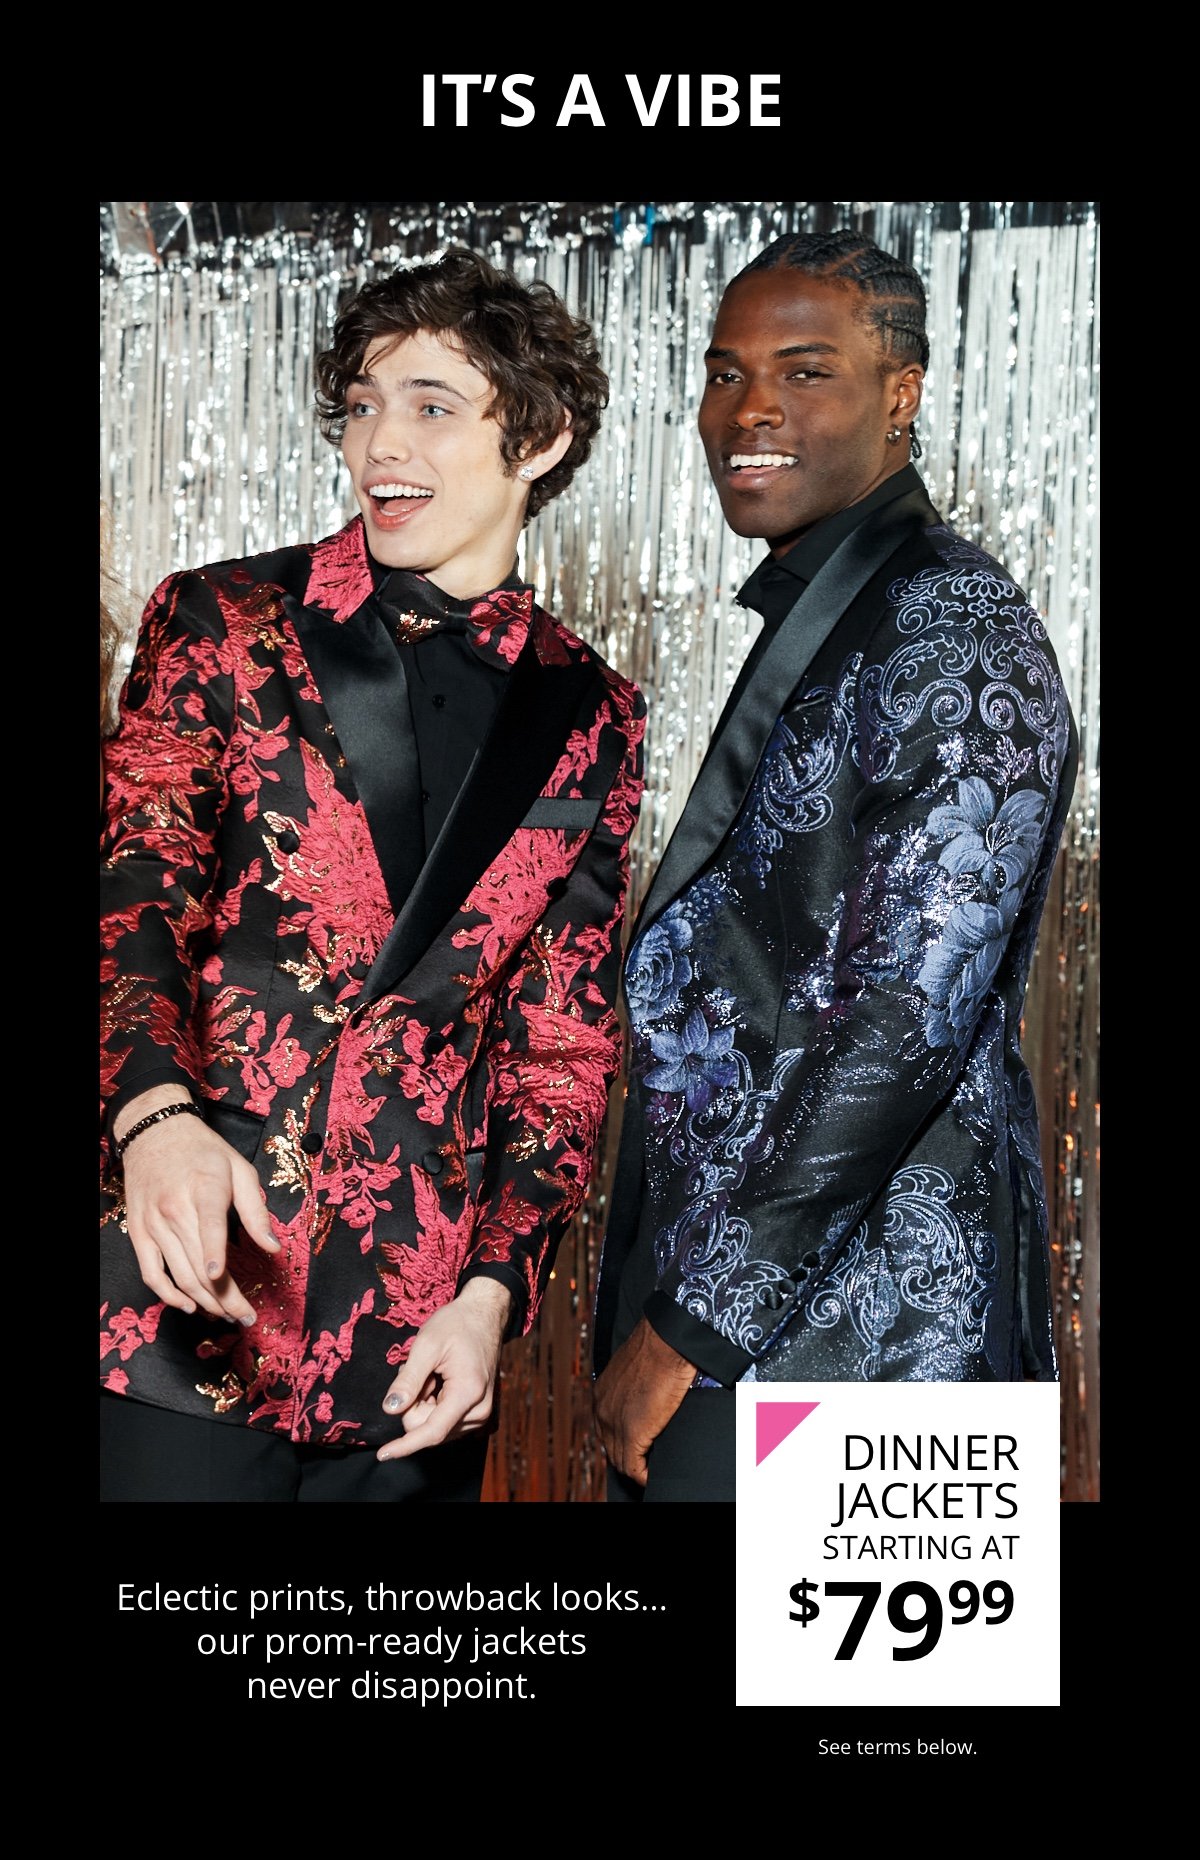 It's a Vibe|Prom Dinner Jackets|Starting at \\$79.99|Eclectic prints, throwback looks…our prom-ready jackets never disappoint.|See terms below.